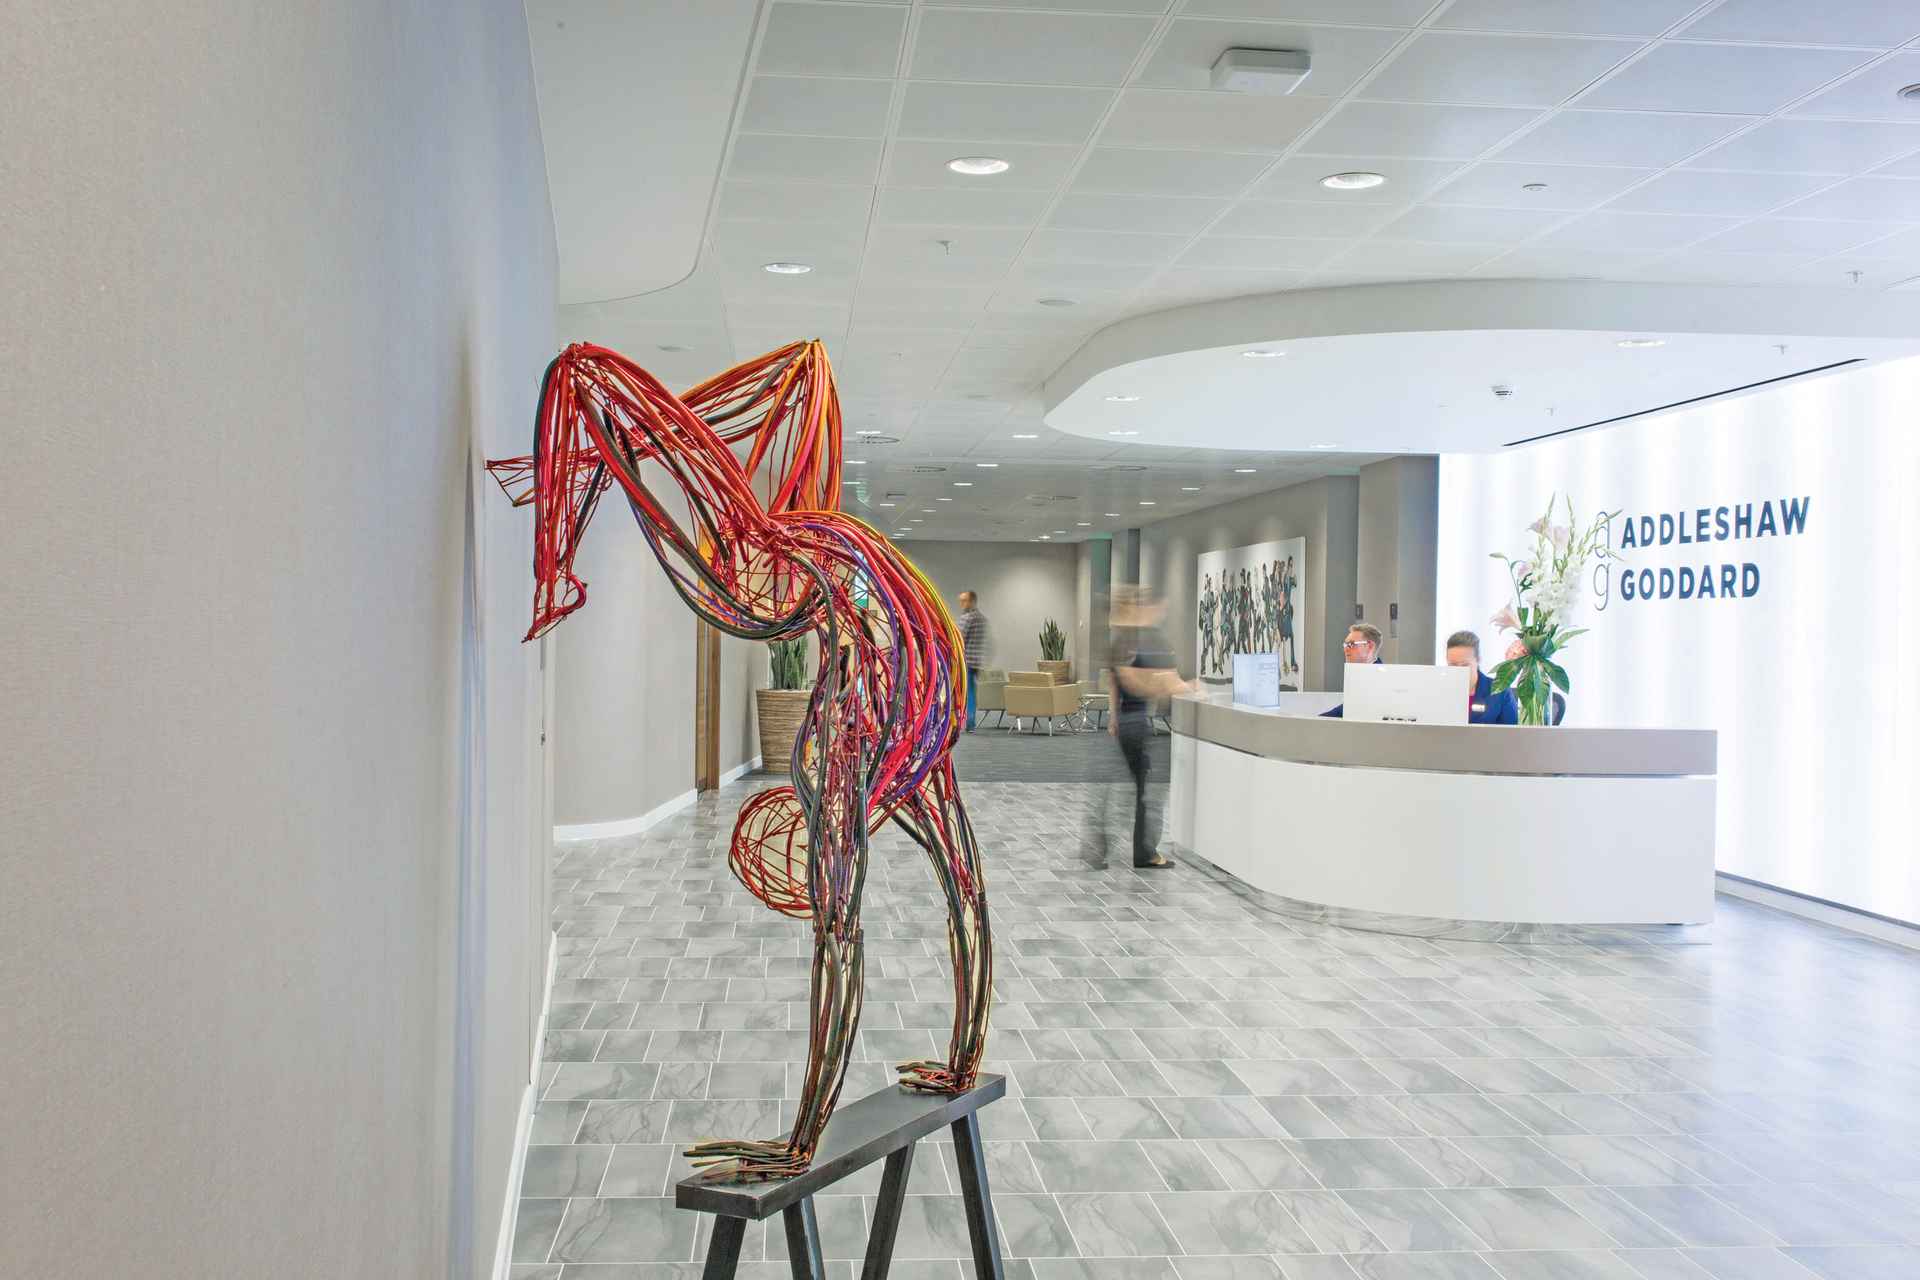 Bringing colour & energy into the working environment. Part of the Addleshaw Goddard project